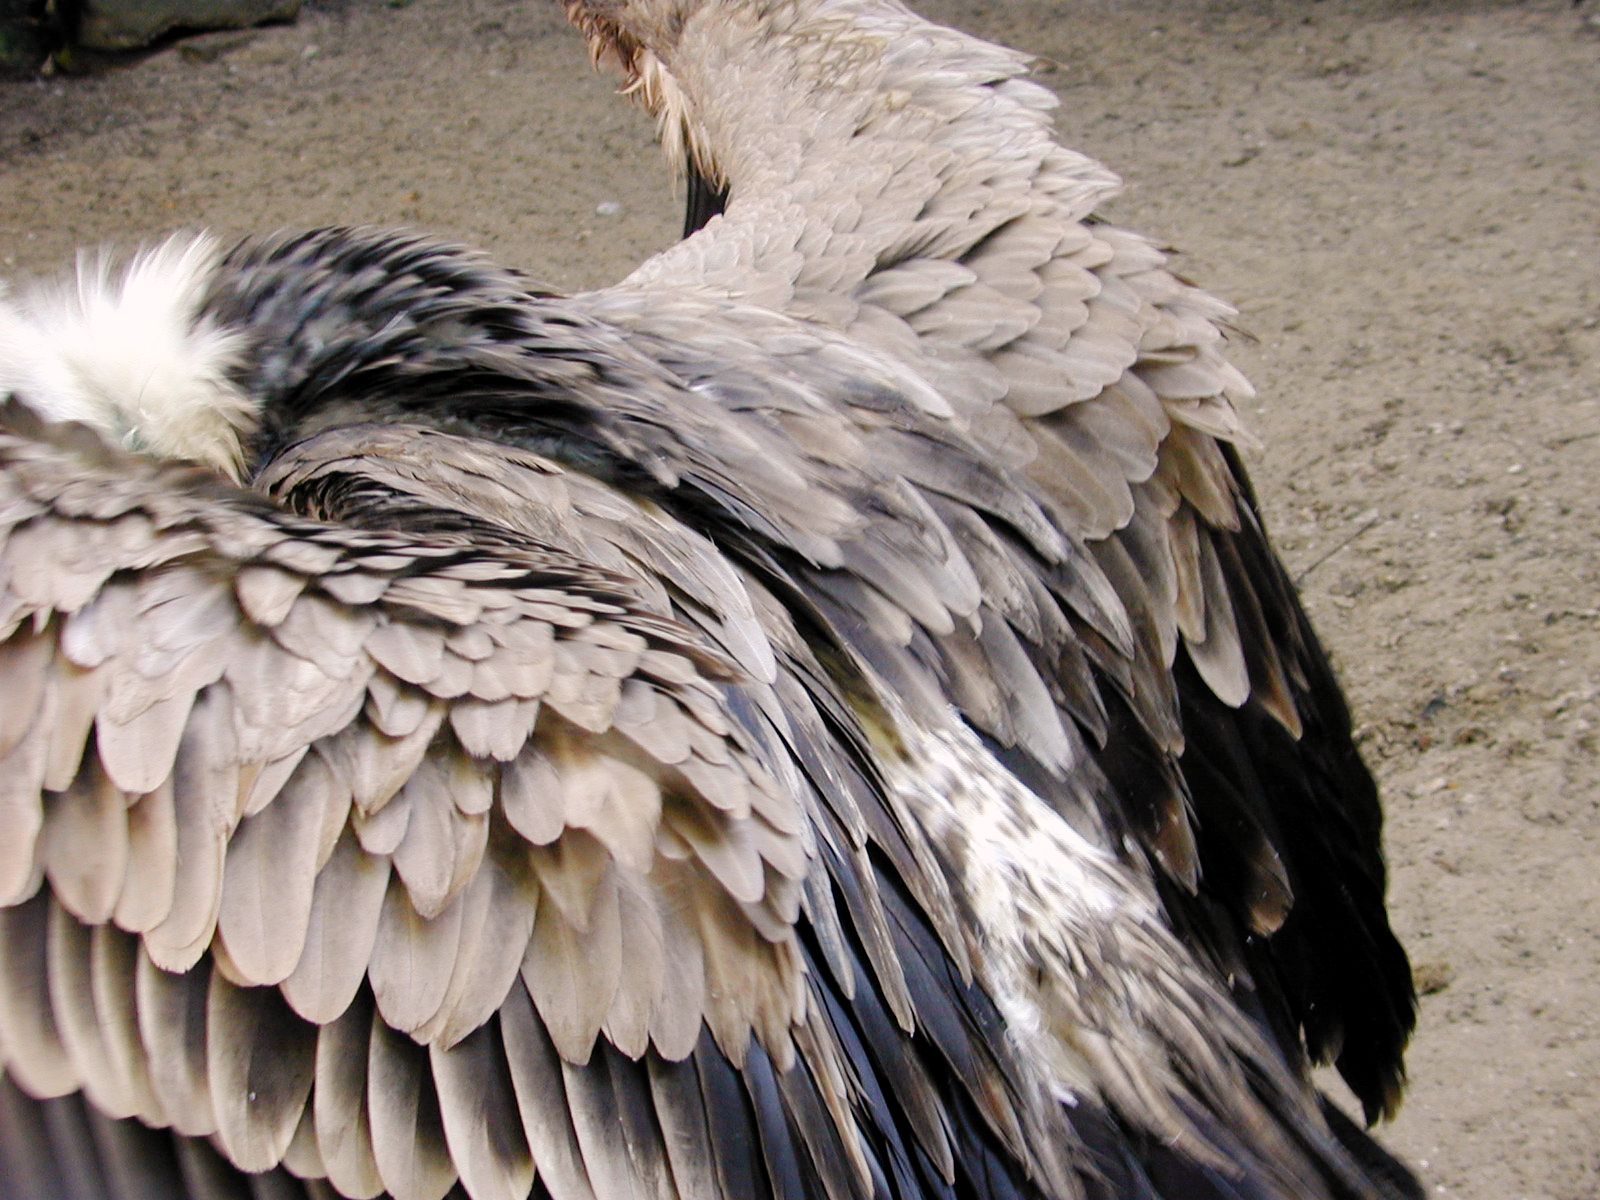 image-after-image-vulture-feathers-zoo-artis-bird-ground-grey-gray